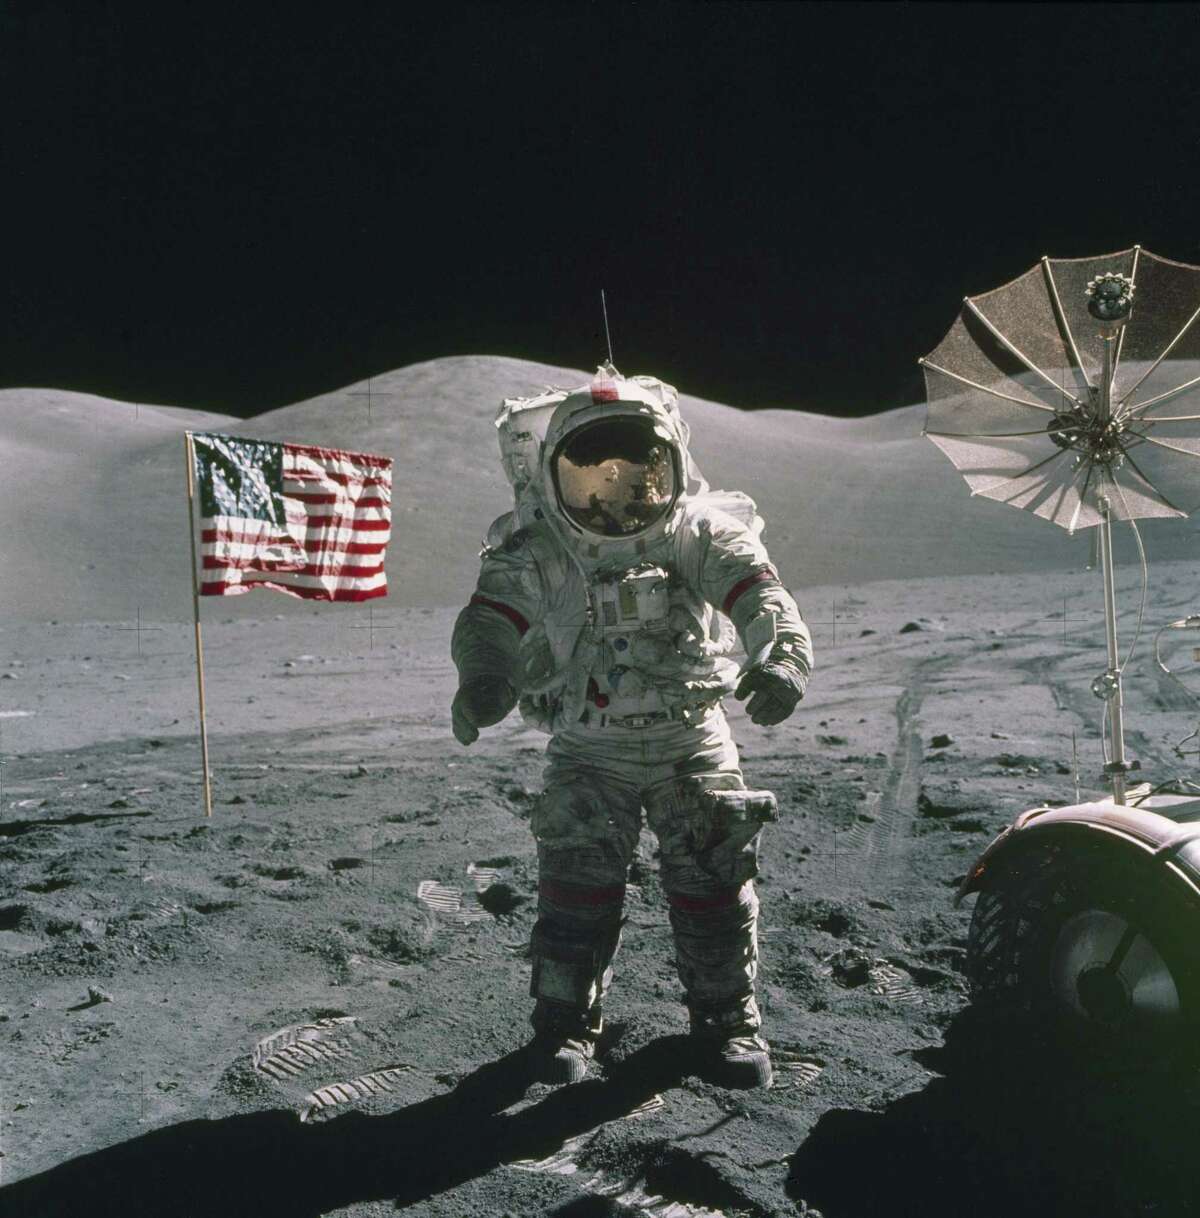 In this Dec. 12, 1972, photo provided by NASA, Apollo 17 commander Eugene Cernan stands on the moon. (NASA via AP)